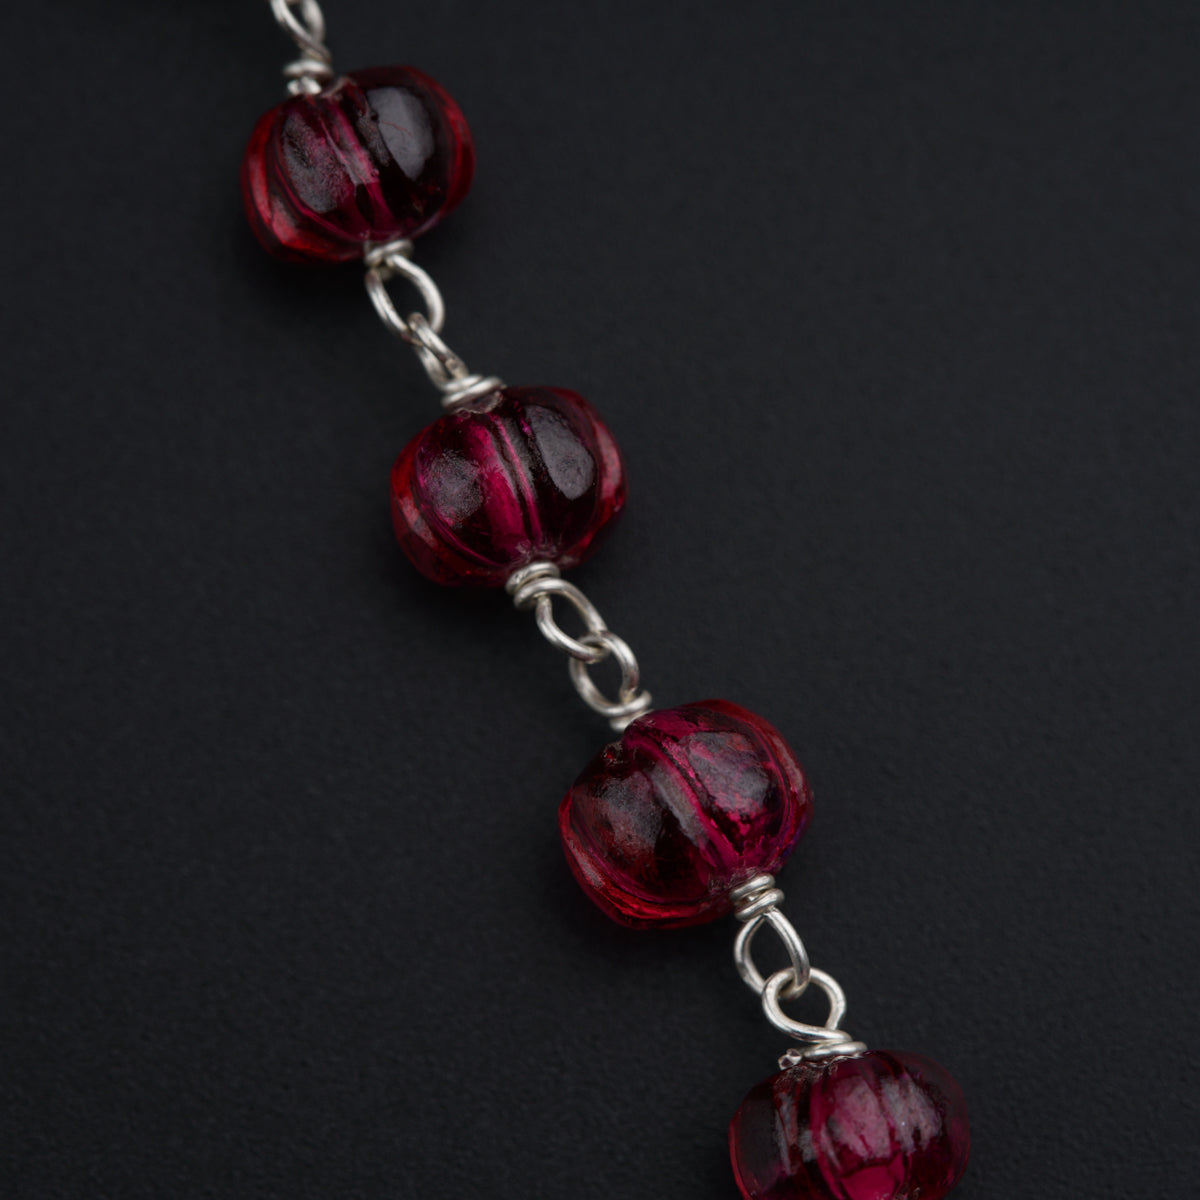 a close up of a bracelet with red beads